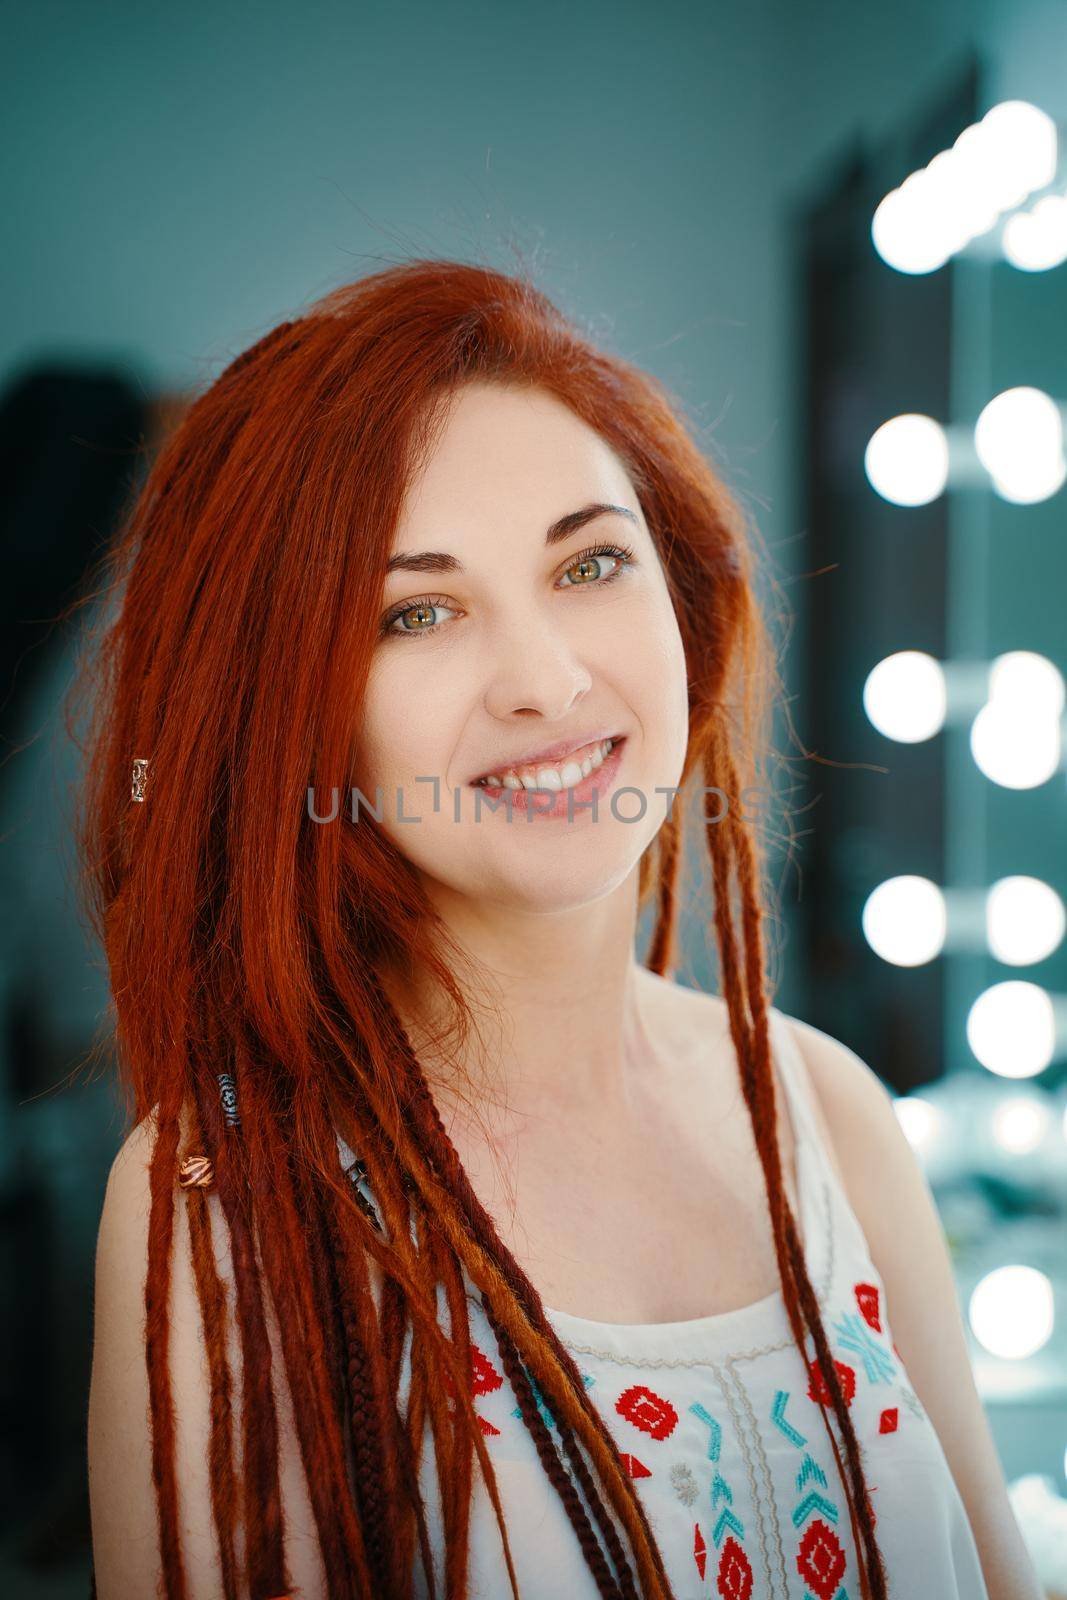 Smiling red-haired girl with long dreadlocks. Beautiful woman looks at camera. Portrait of female with ginger dreads in beauty salon. Unusual coiffure. Hippie or boho style.